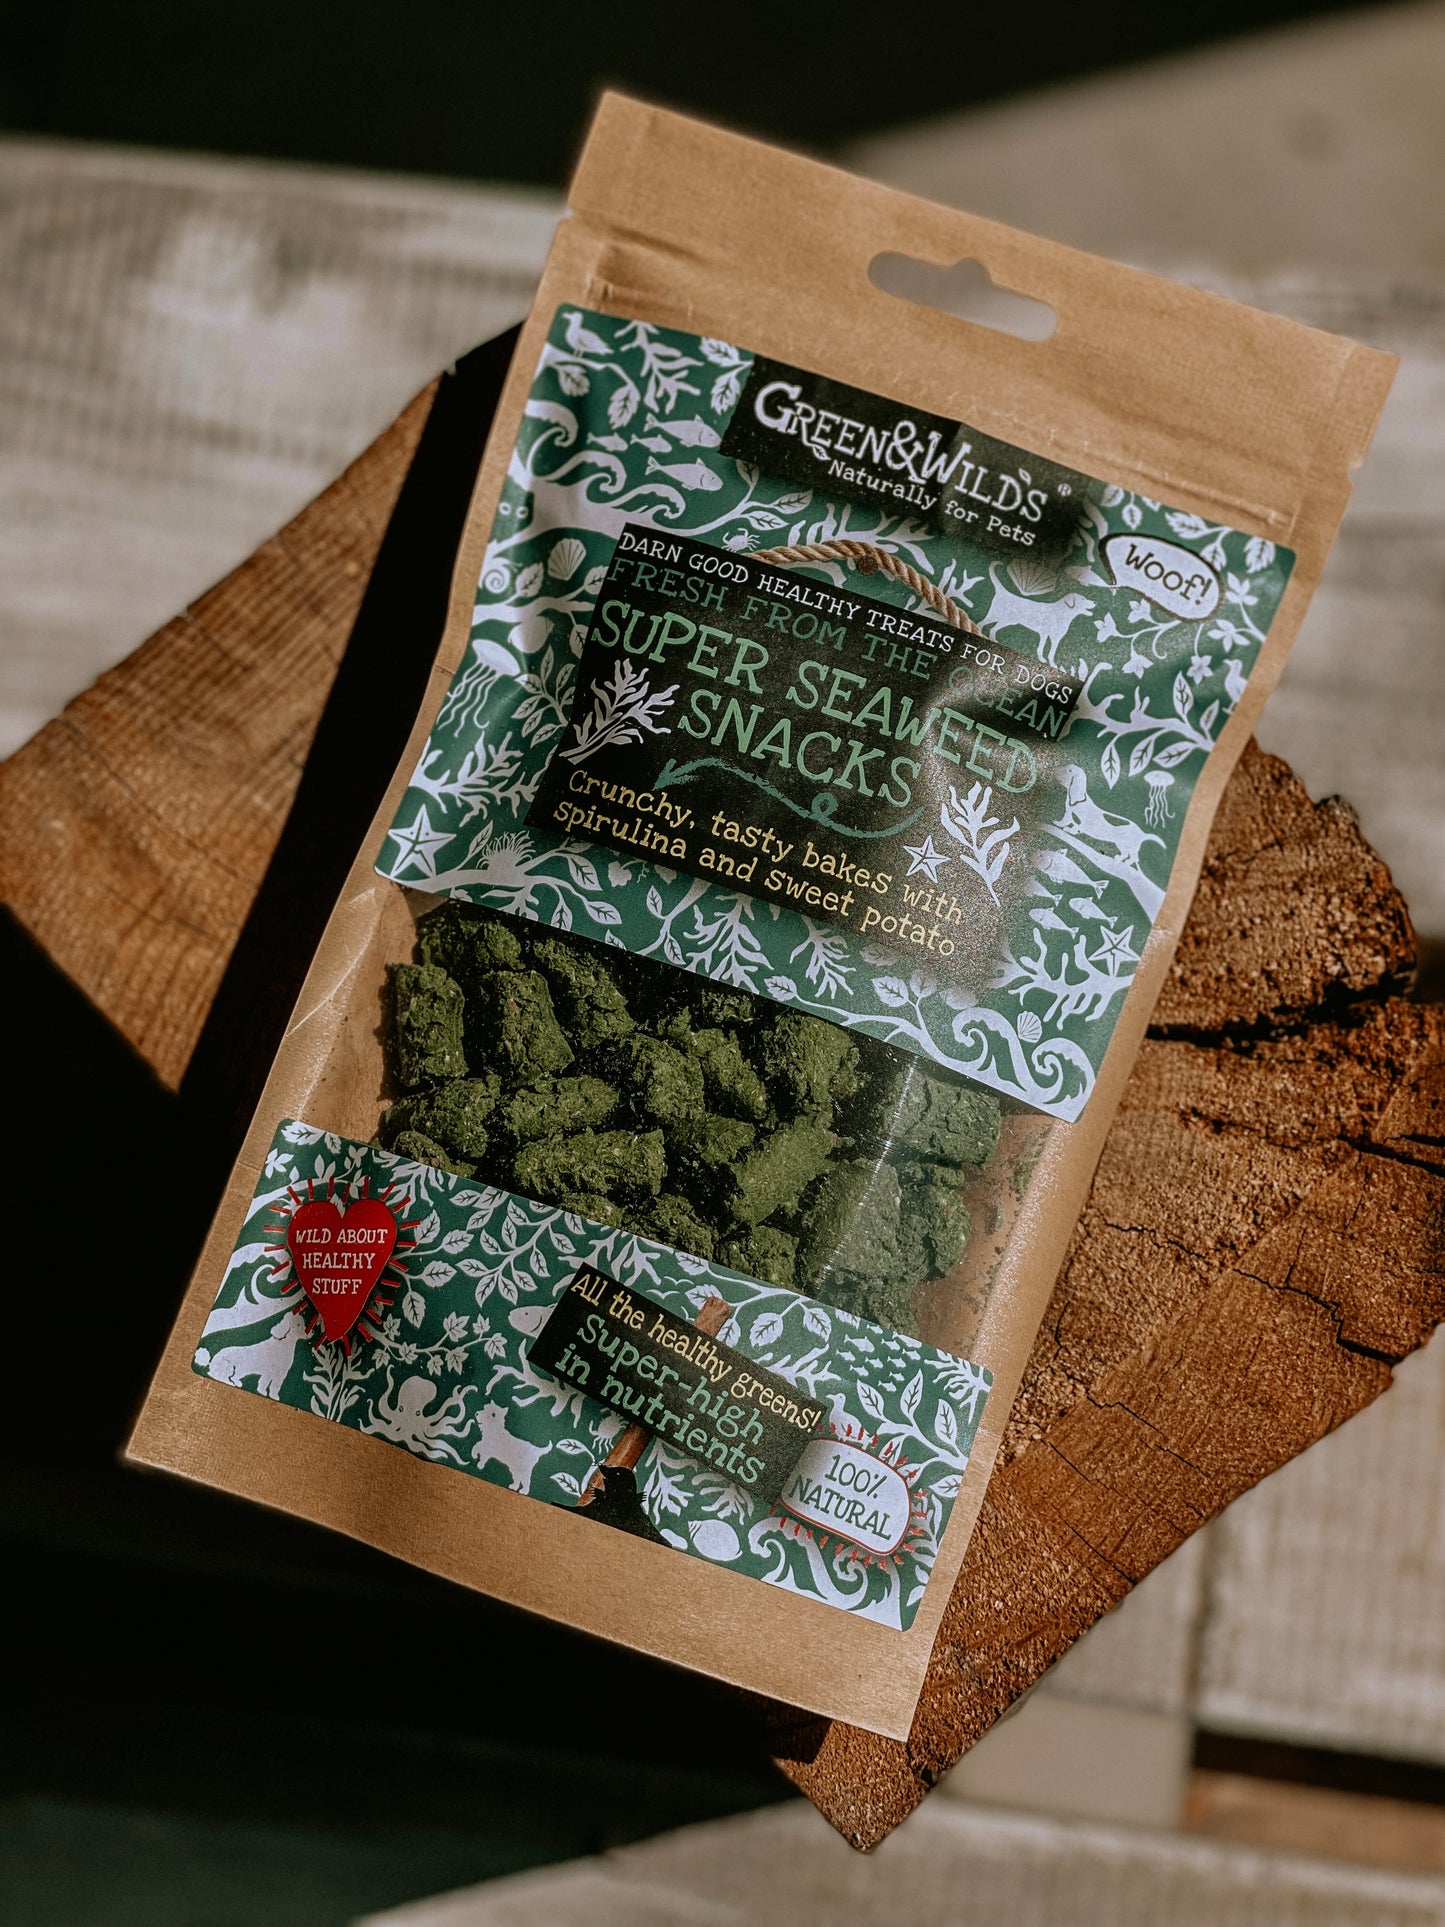 GREEN AND WILDS SUPER SEAWEED SNACKS AVAILABLE ON BODHI. AND THE BRICHTREE -https://www.greenandwilds.co.uk